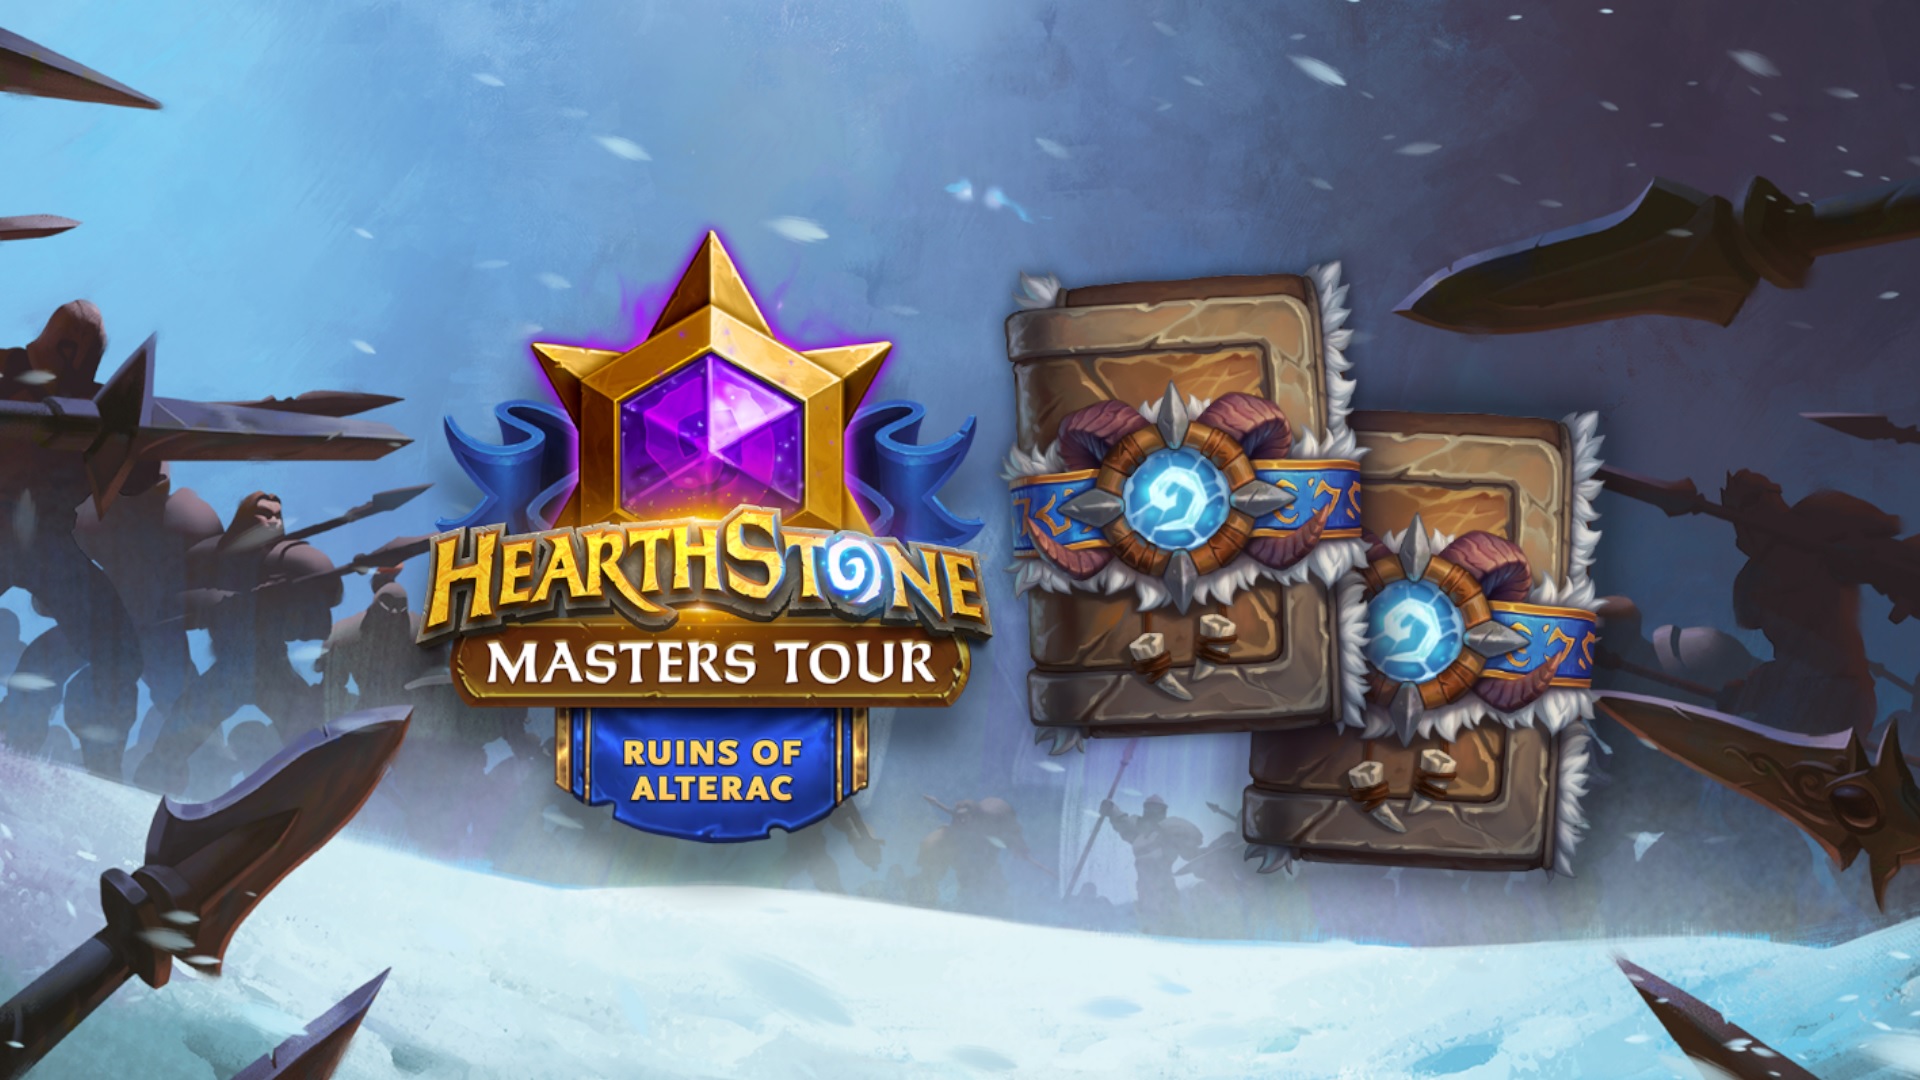 Hearthstone Masters Tour Ruins of Alterac